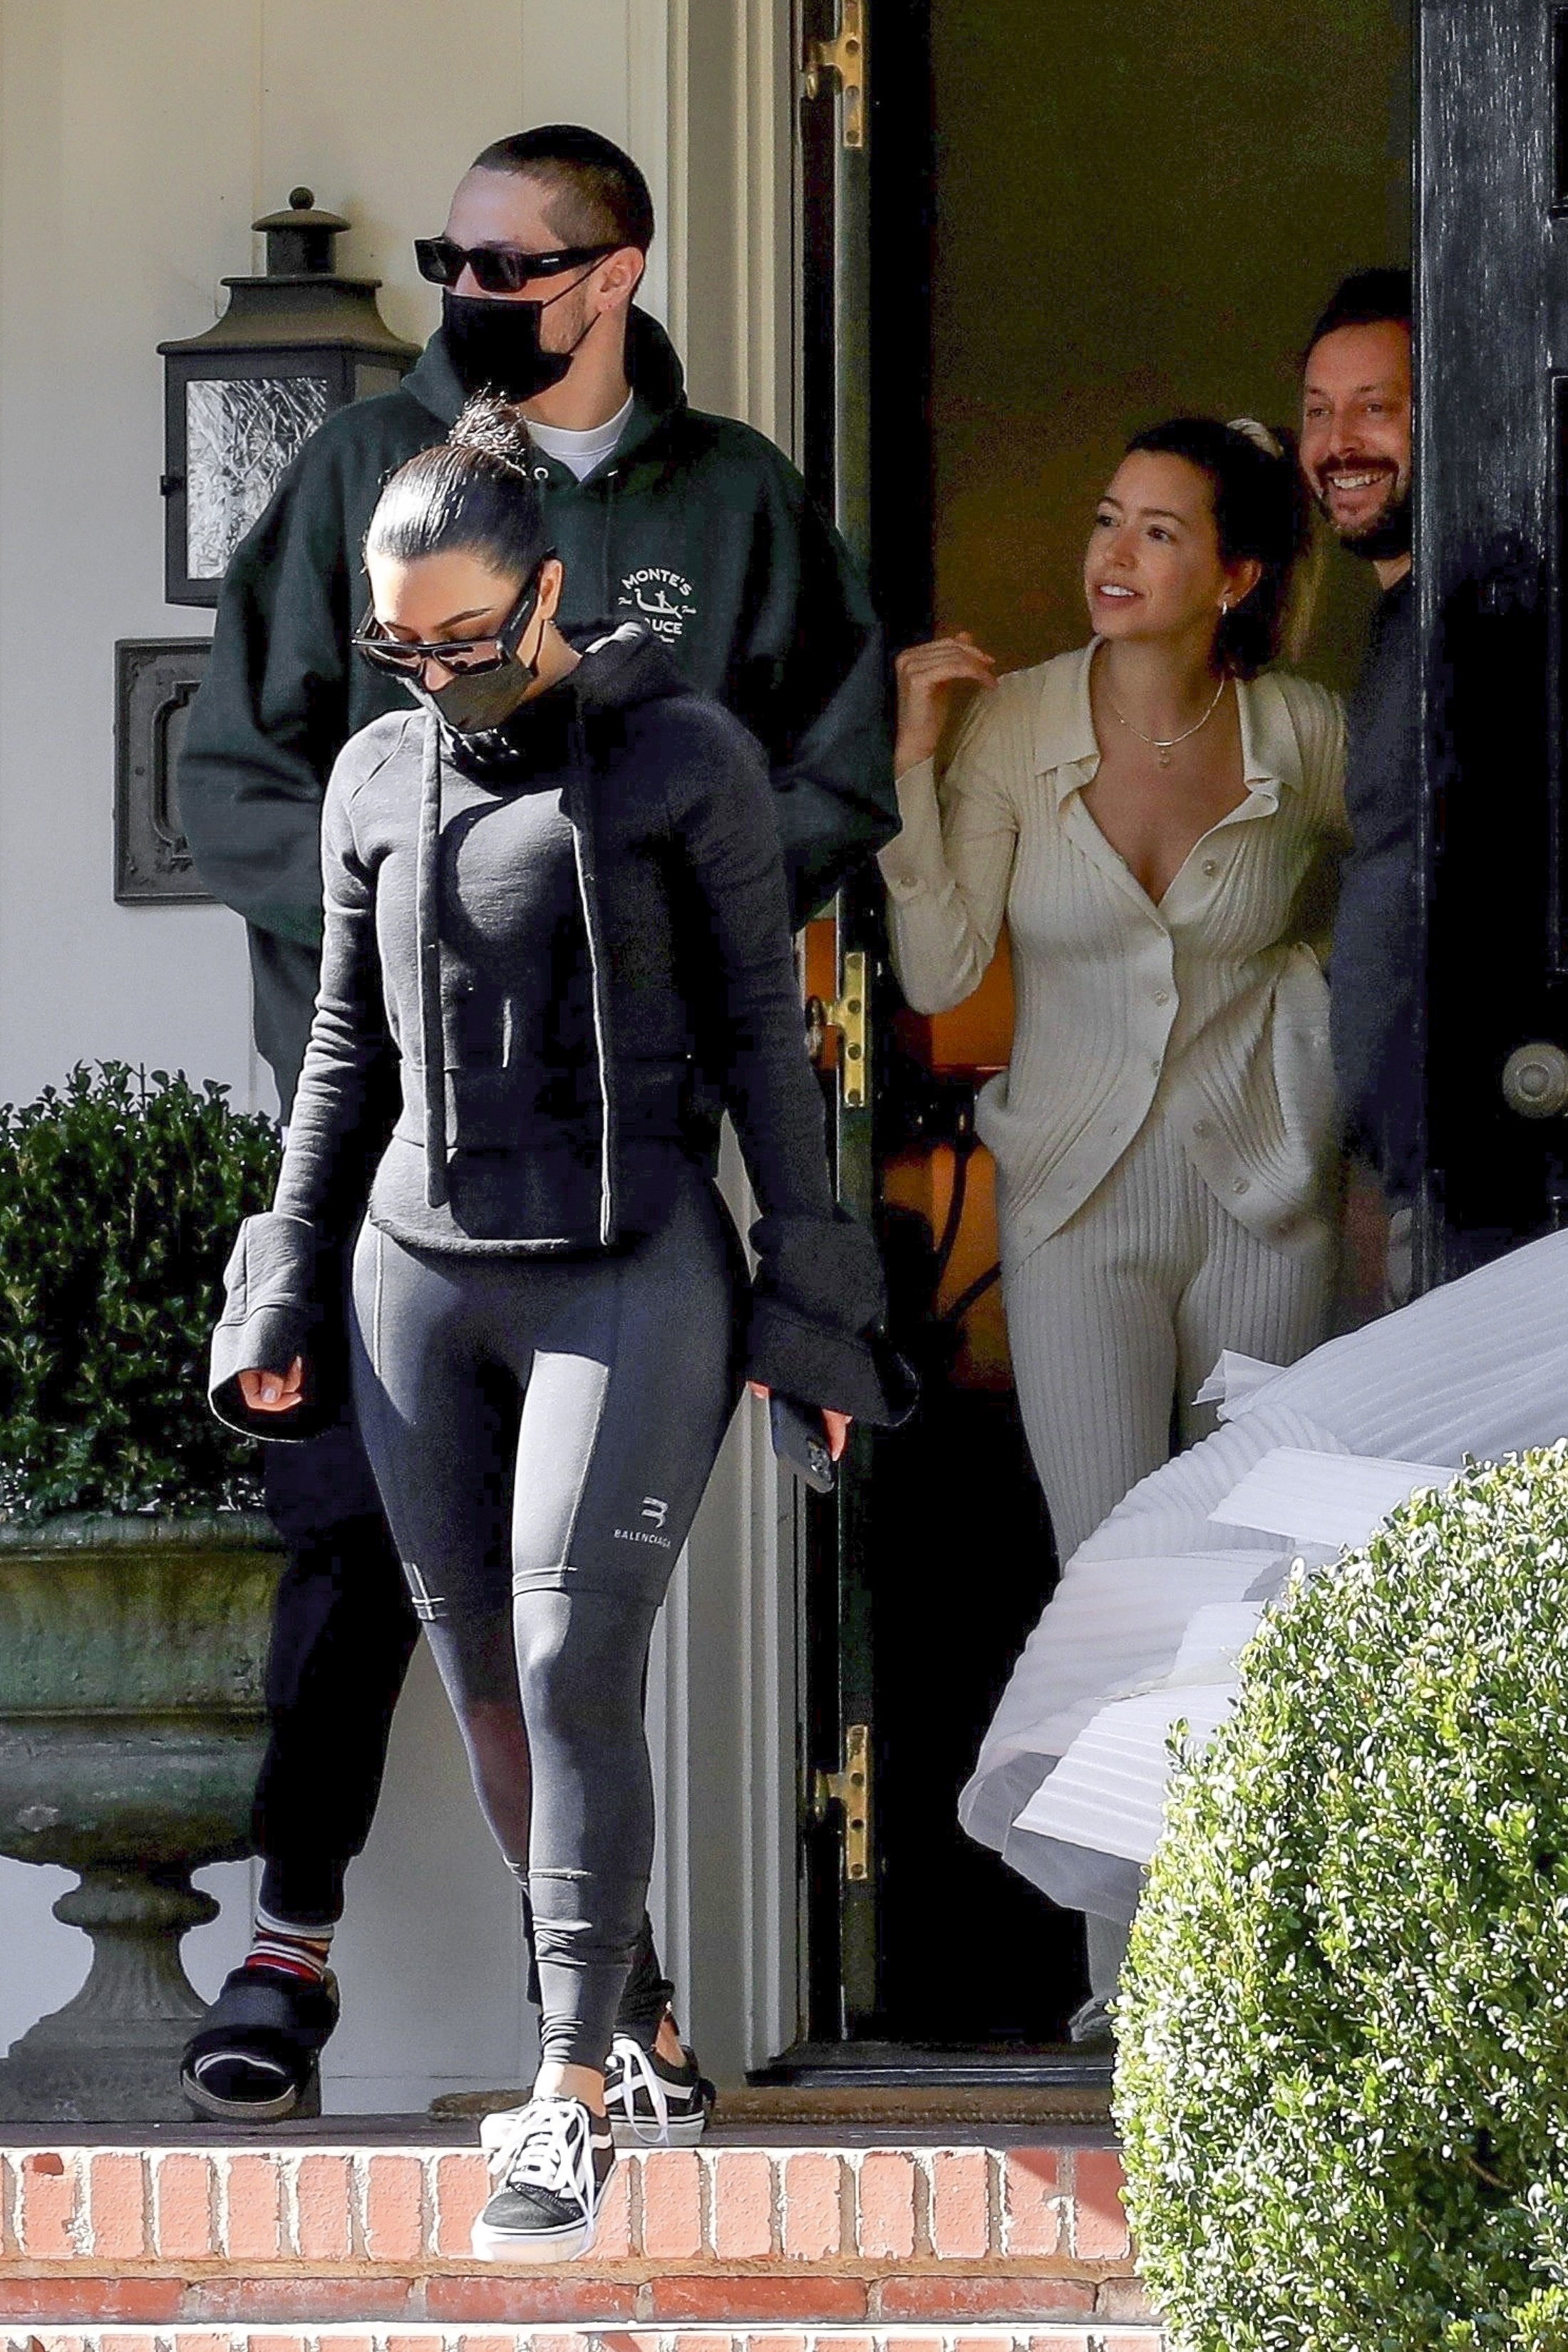 Photo © 2022 Backgrid/The Grosby GroupEXCLUSIVE Beverly Hills, CA, 27 JANUARY 2022 New Hollywood couple Kim Kardashian and Pete Davidson were spotted in the 90210 area and spent some time visiting a friend. The couple were seen chatting with the own (Foto: Backgrid/The Grosby Group)